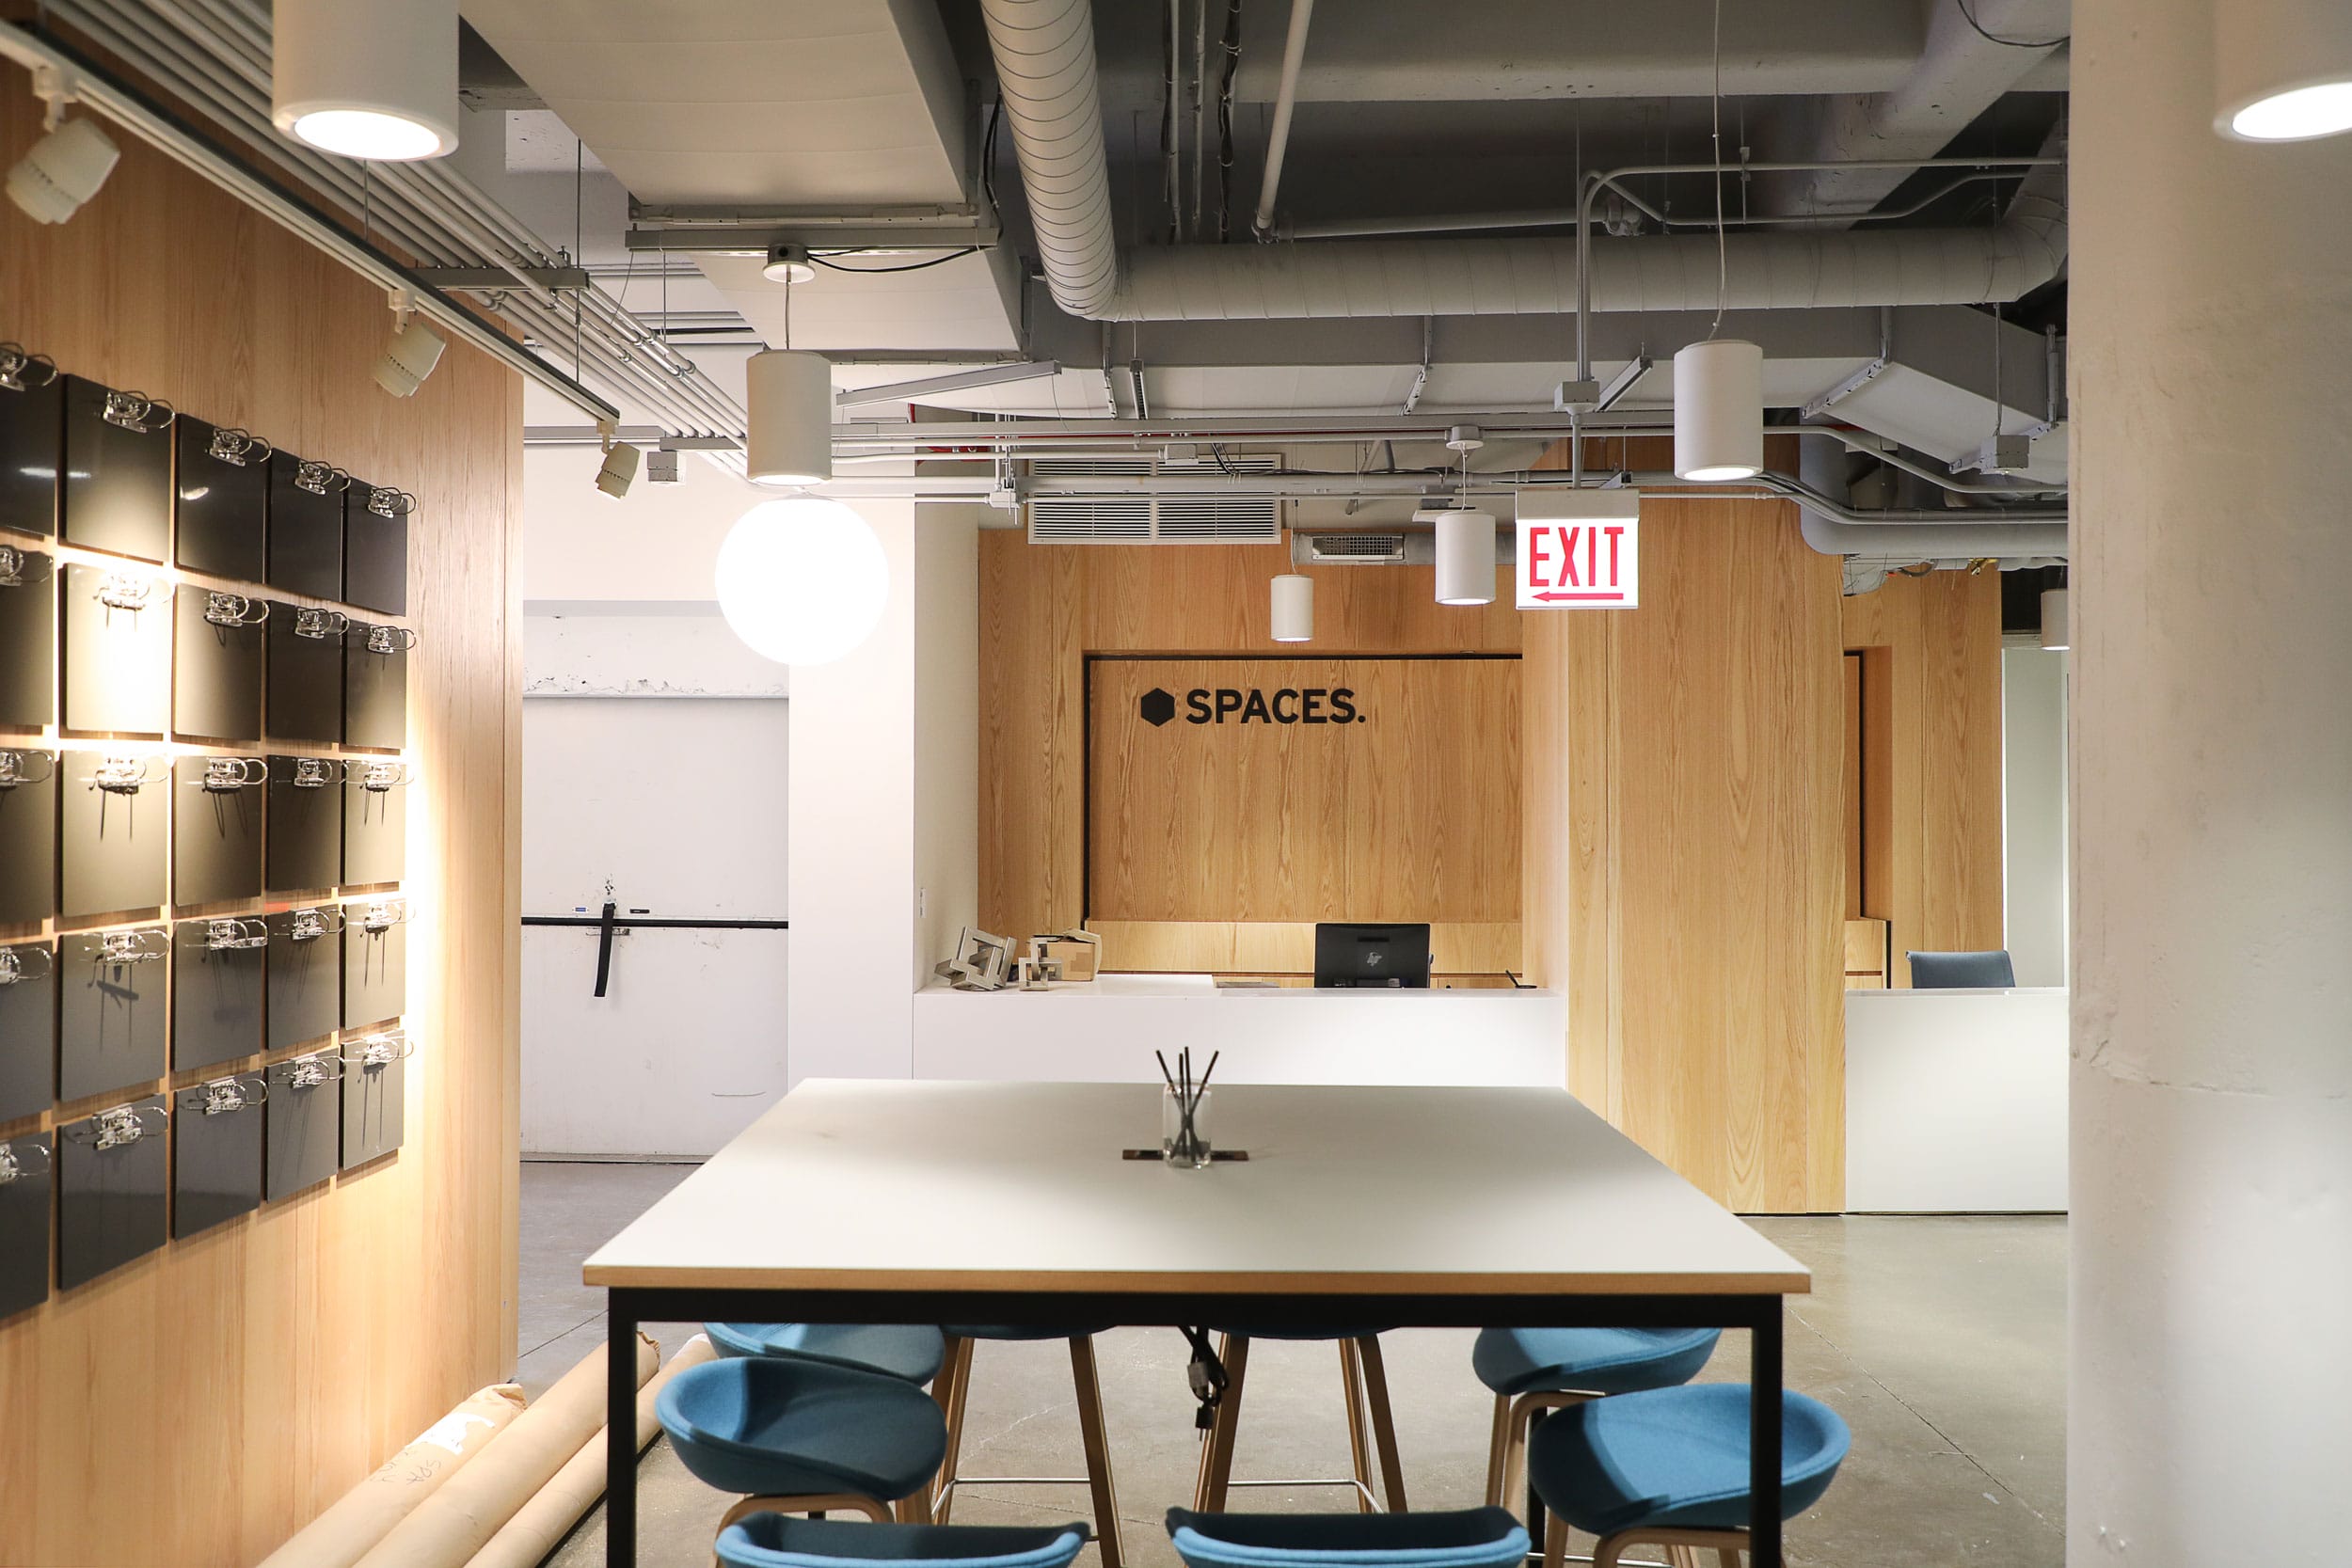 Skender Completes Interior Construction of Coworking Brand “Spaces” for IWG